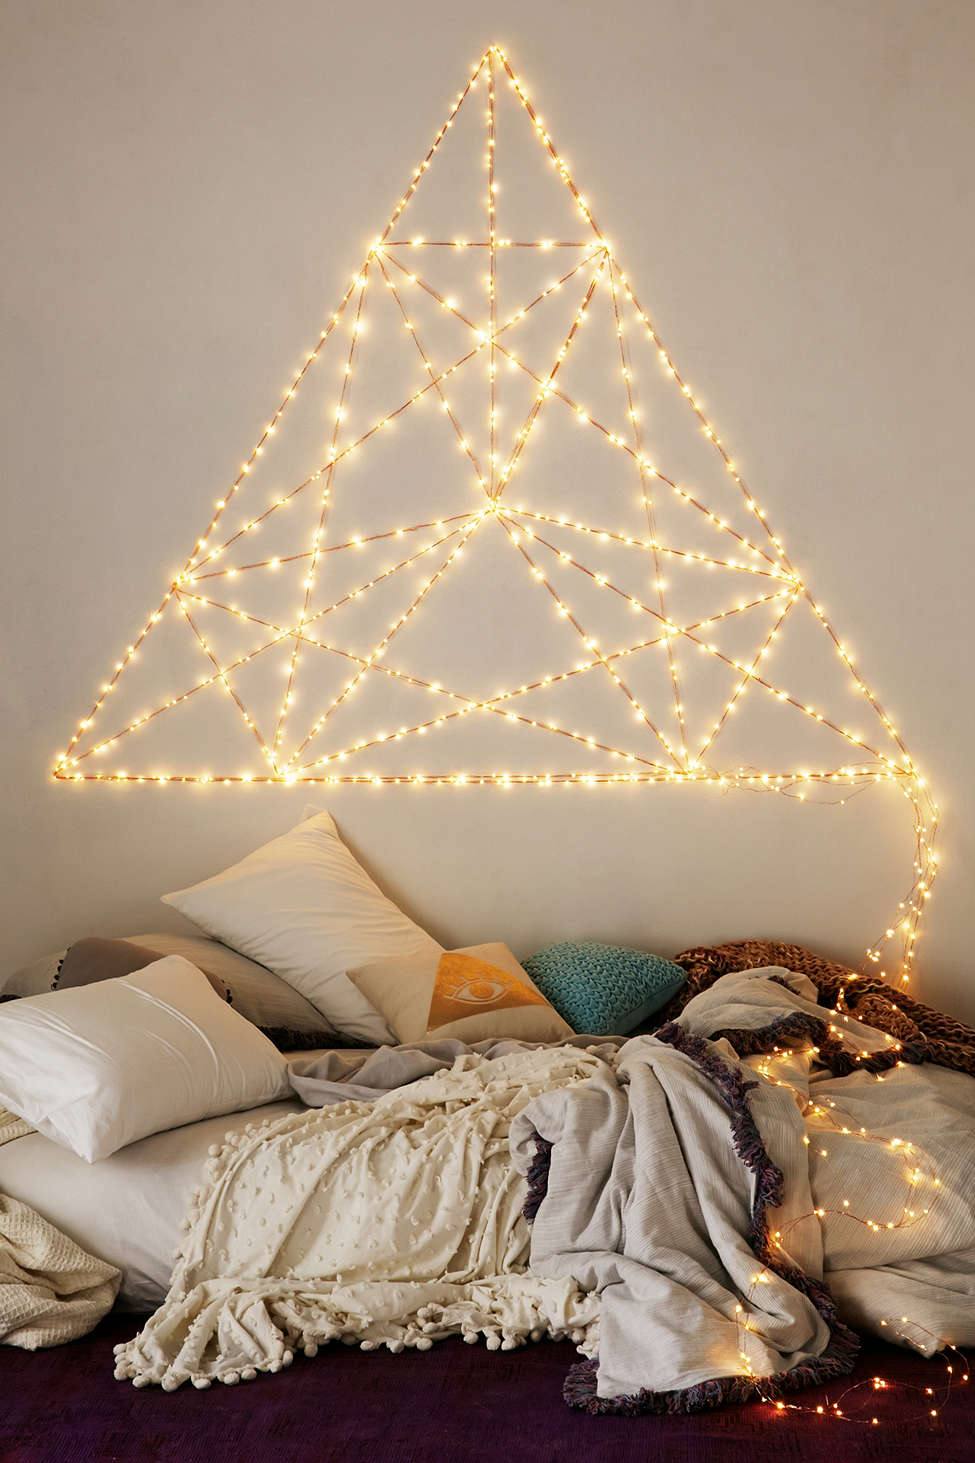 fairytale-lights-into-the-bedroom-dip-feed-5